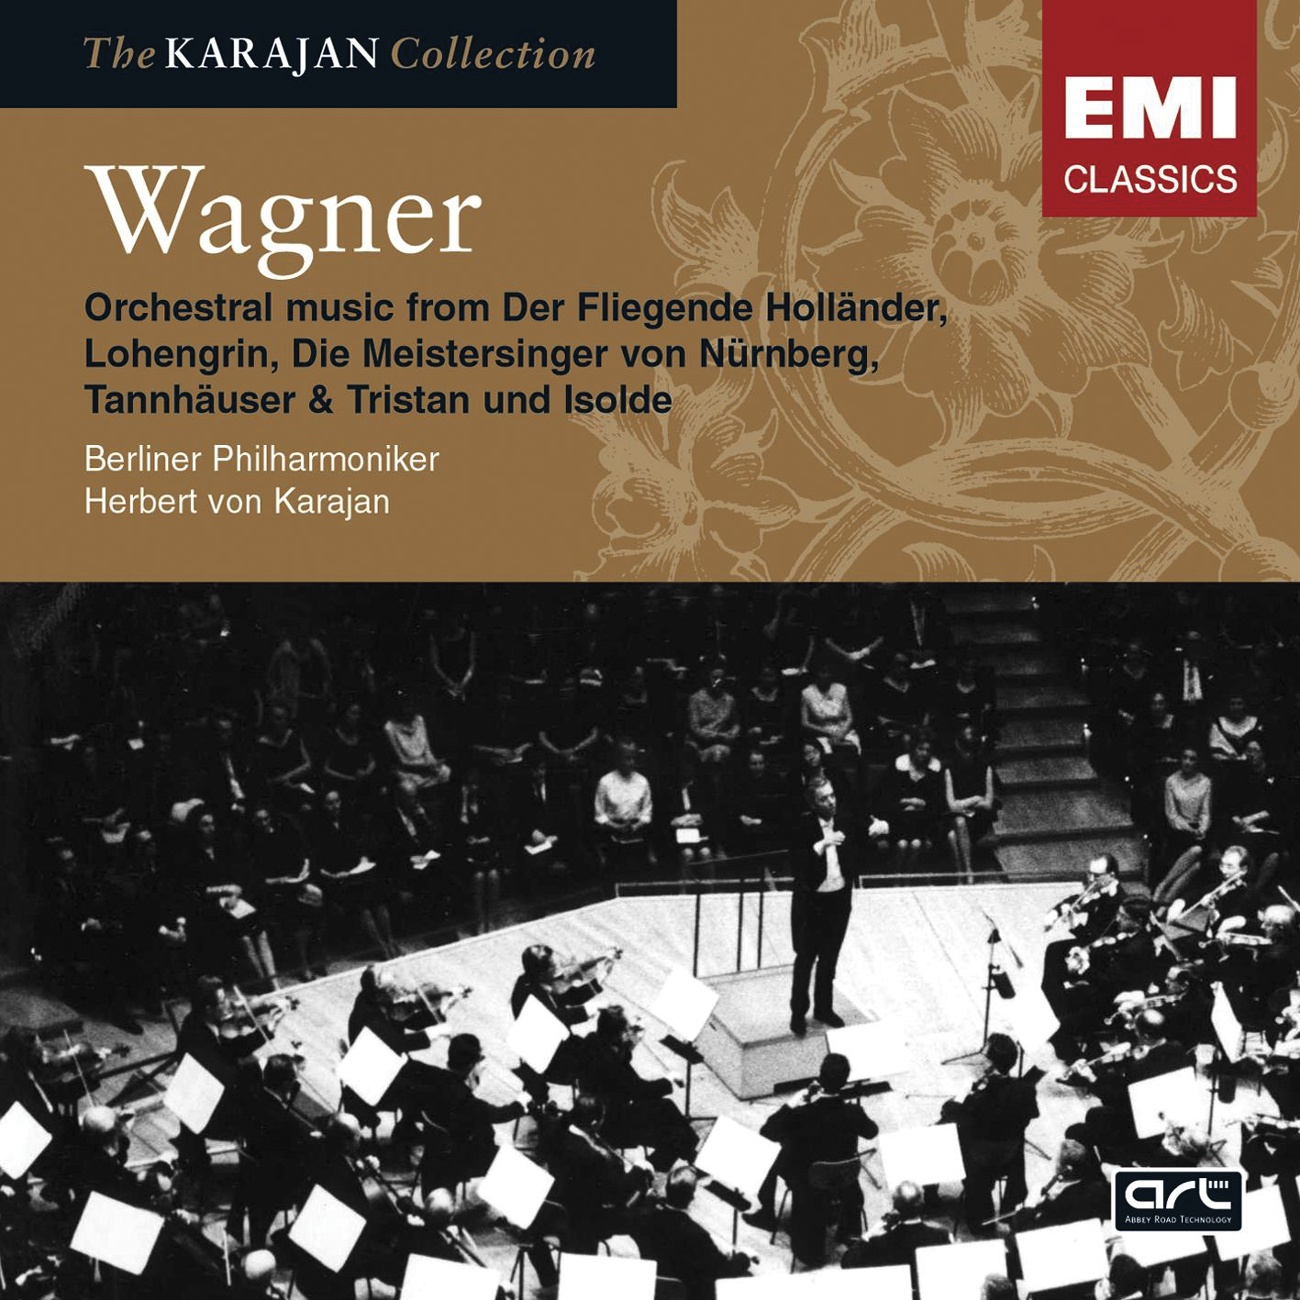 Prelude to Act III from Lohengrin (1996 Digital Remaster)